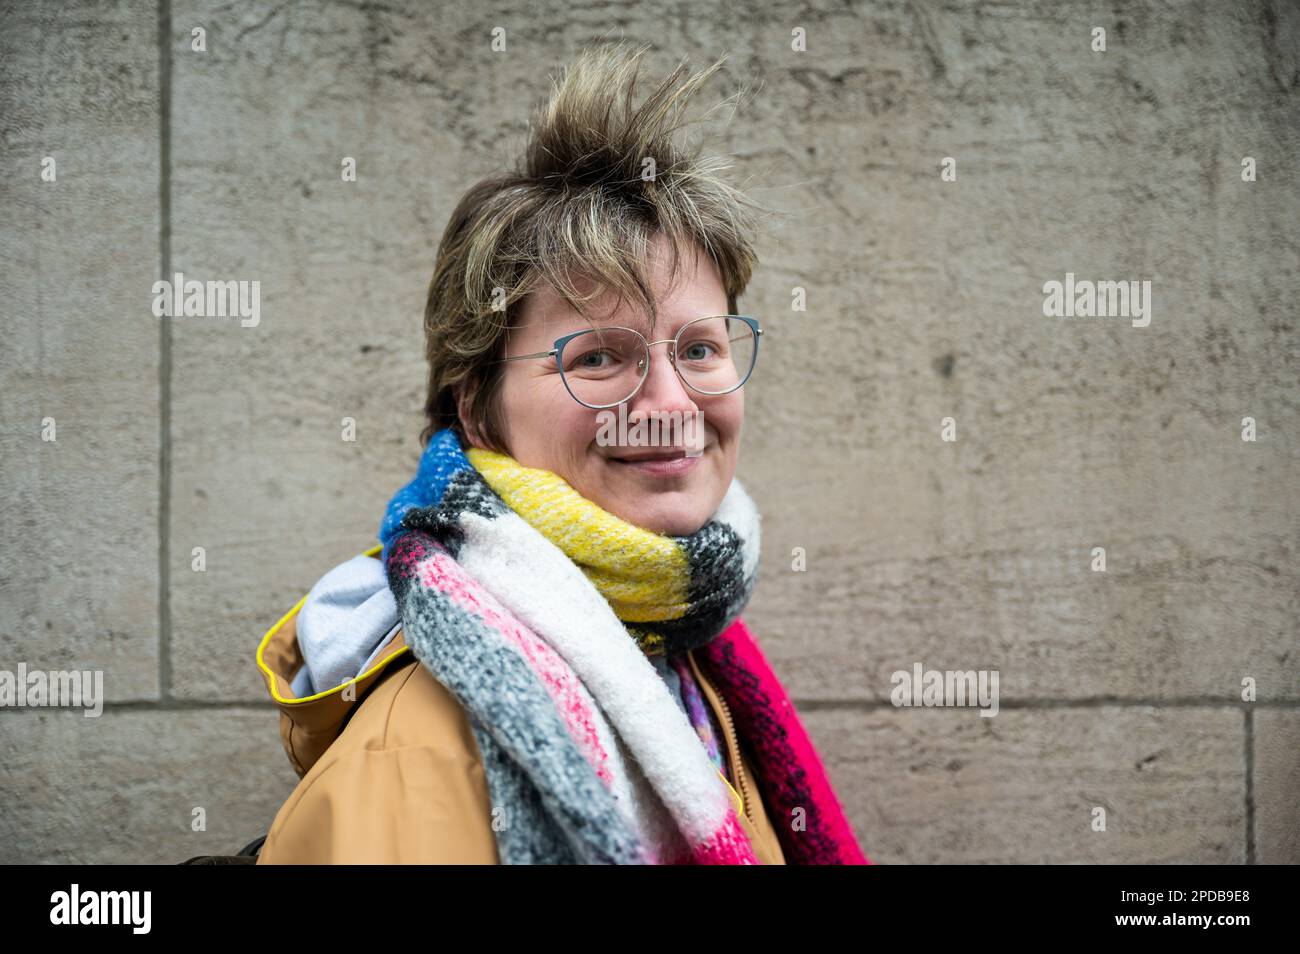 Portrait of a happy 36 year old white woman in a colorful scarf against a wall, Brussels, Belgium Stock Photo